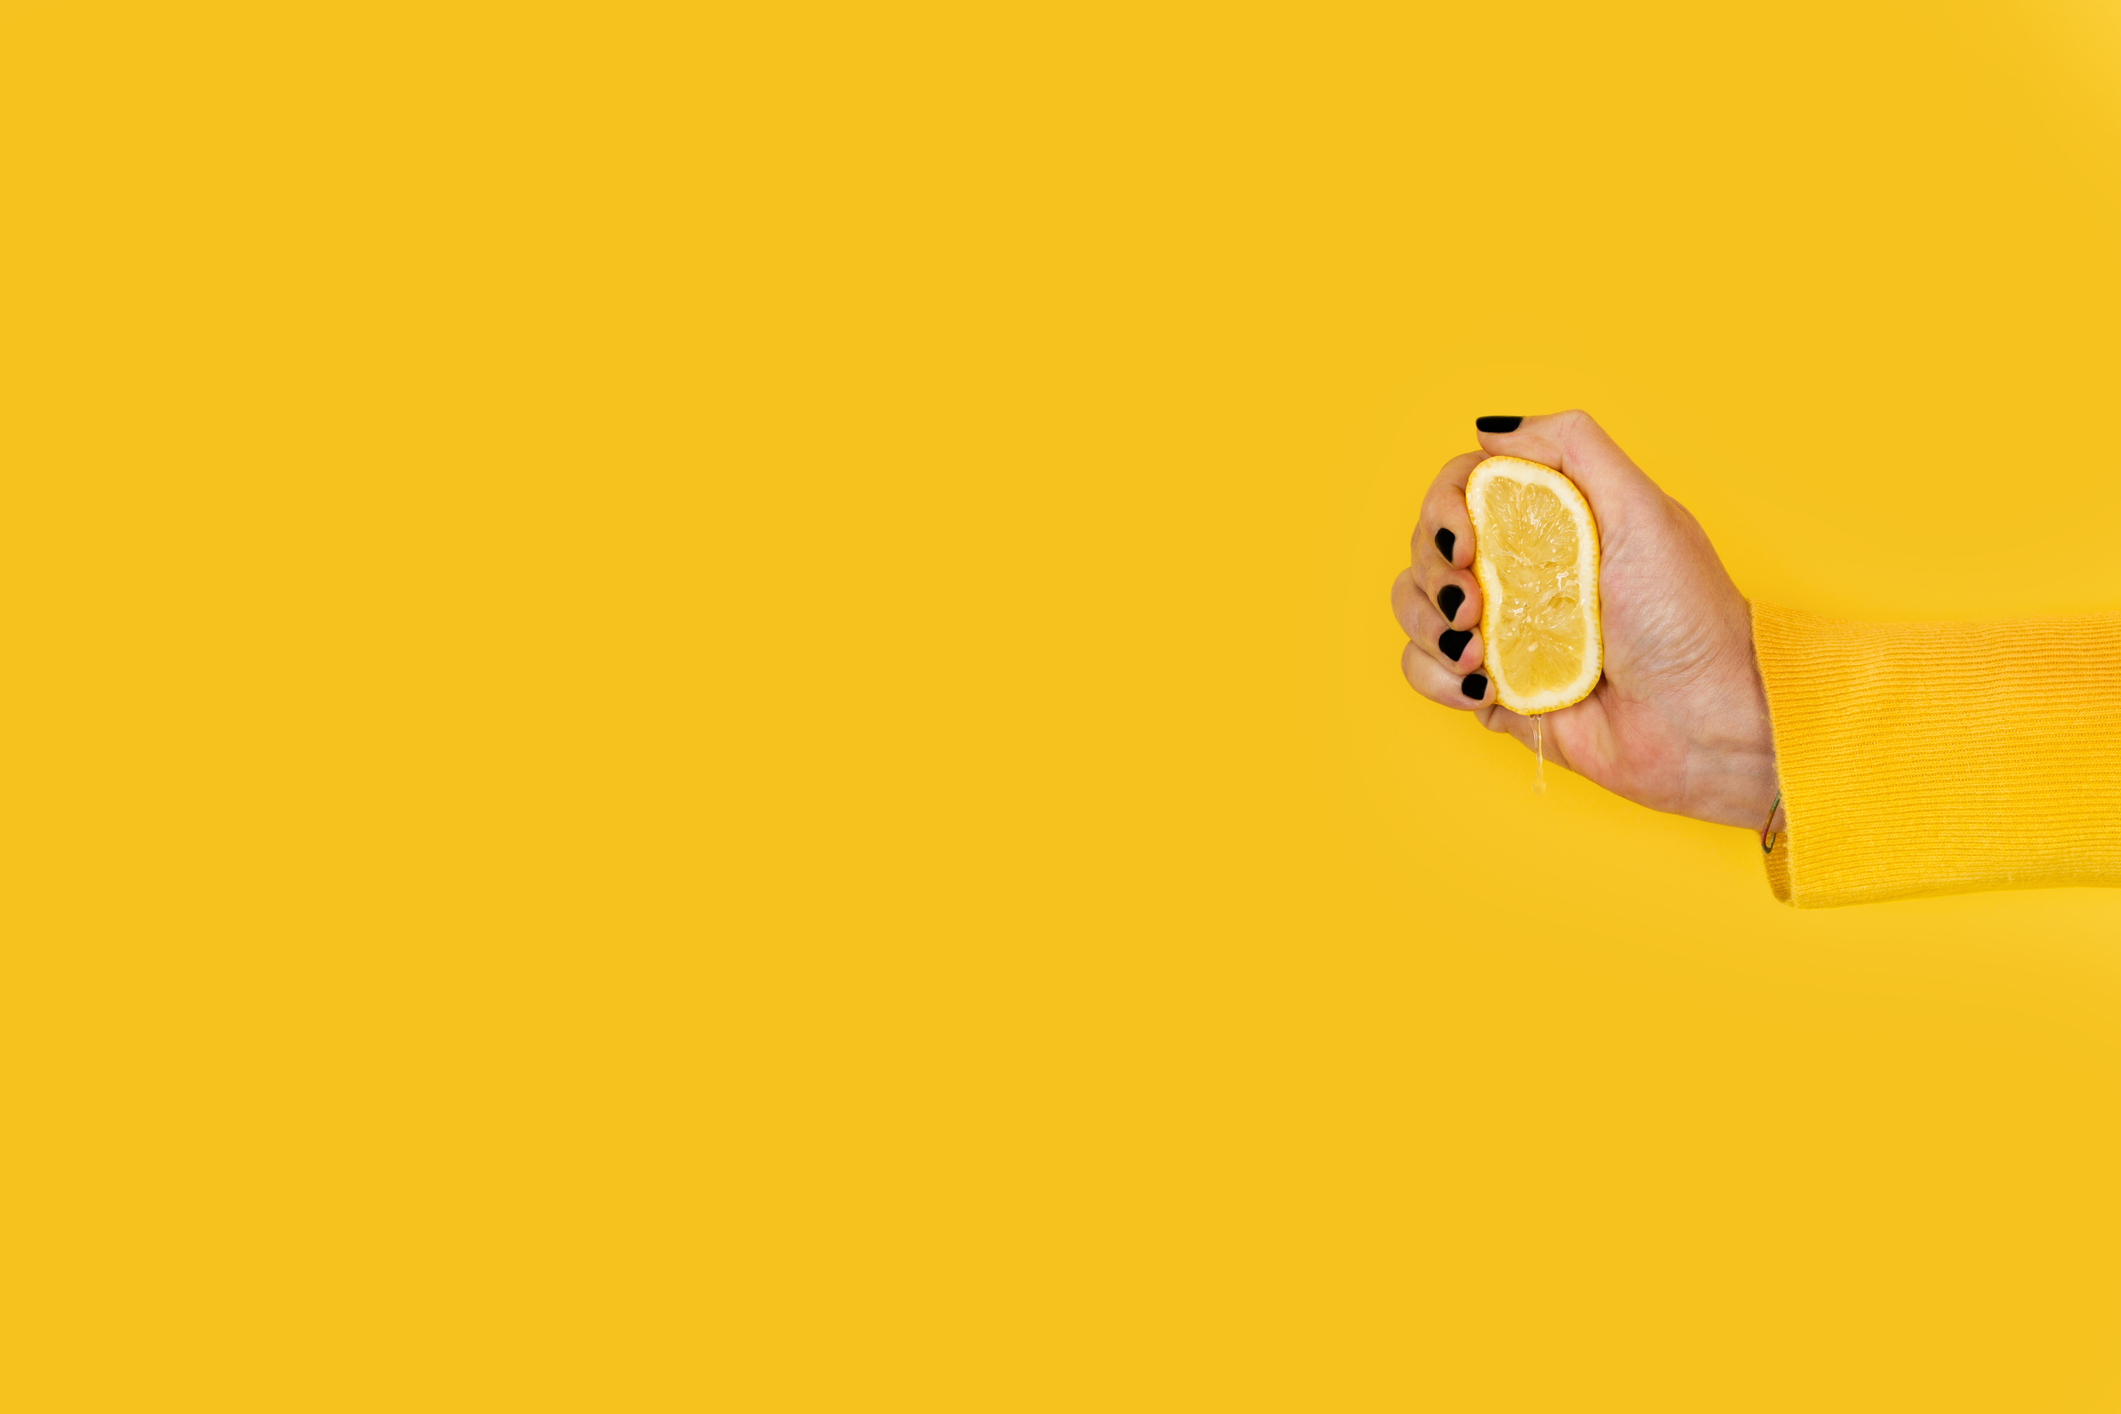 Woman squeezing a half lemon on a yellow background - web based insurance software